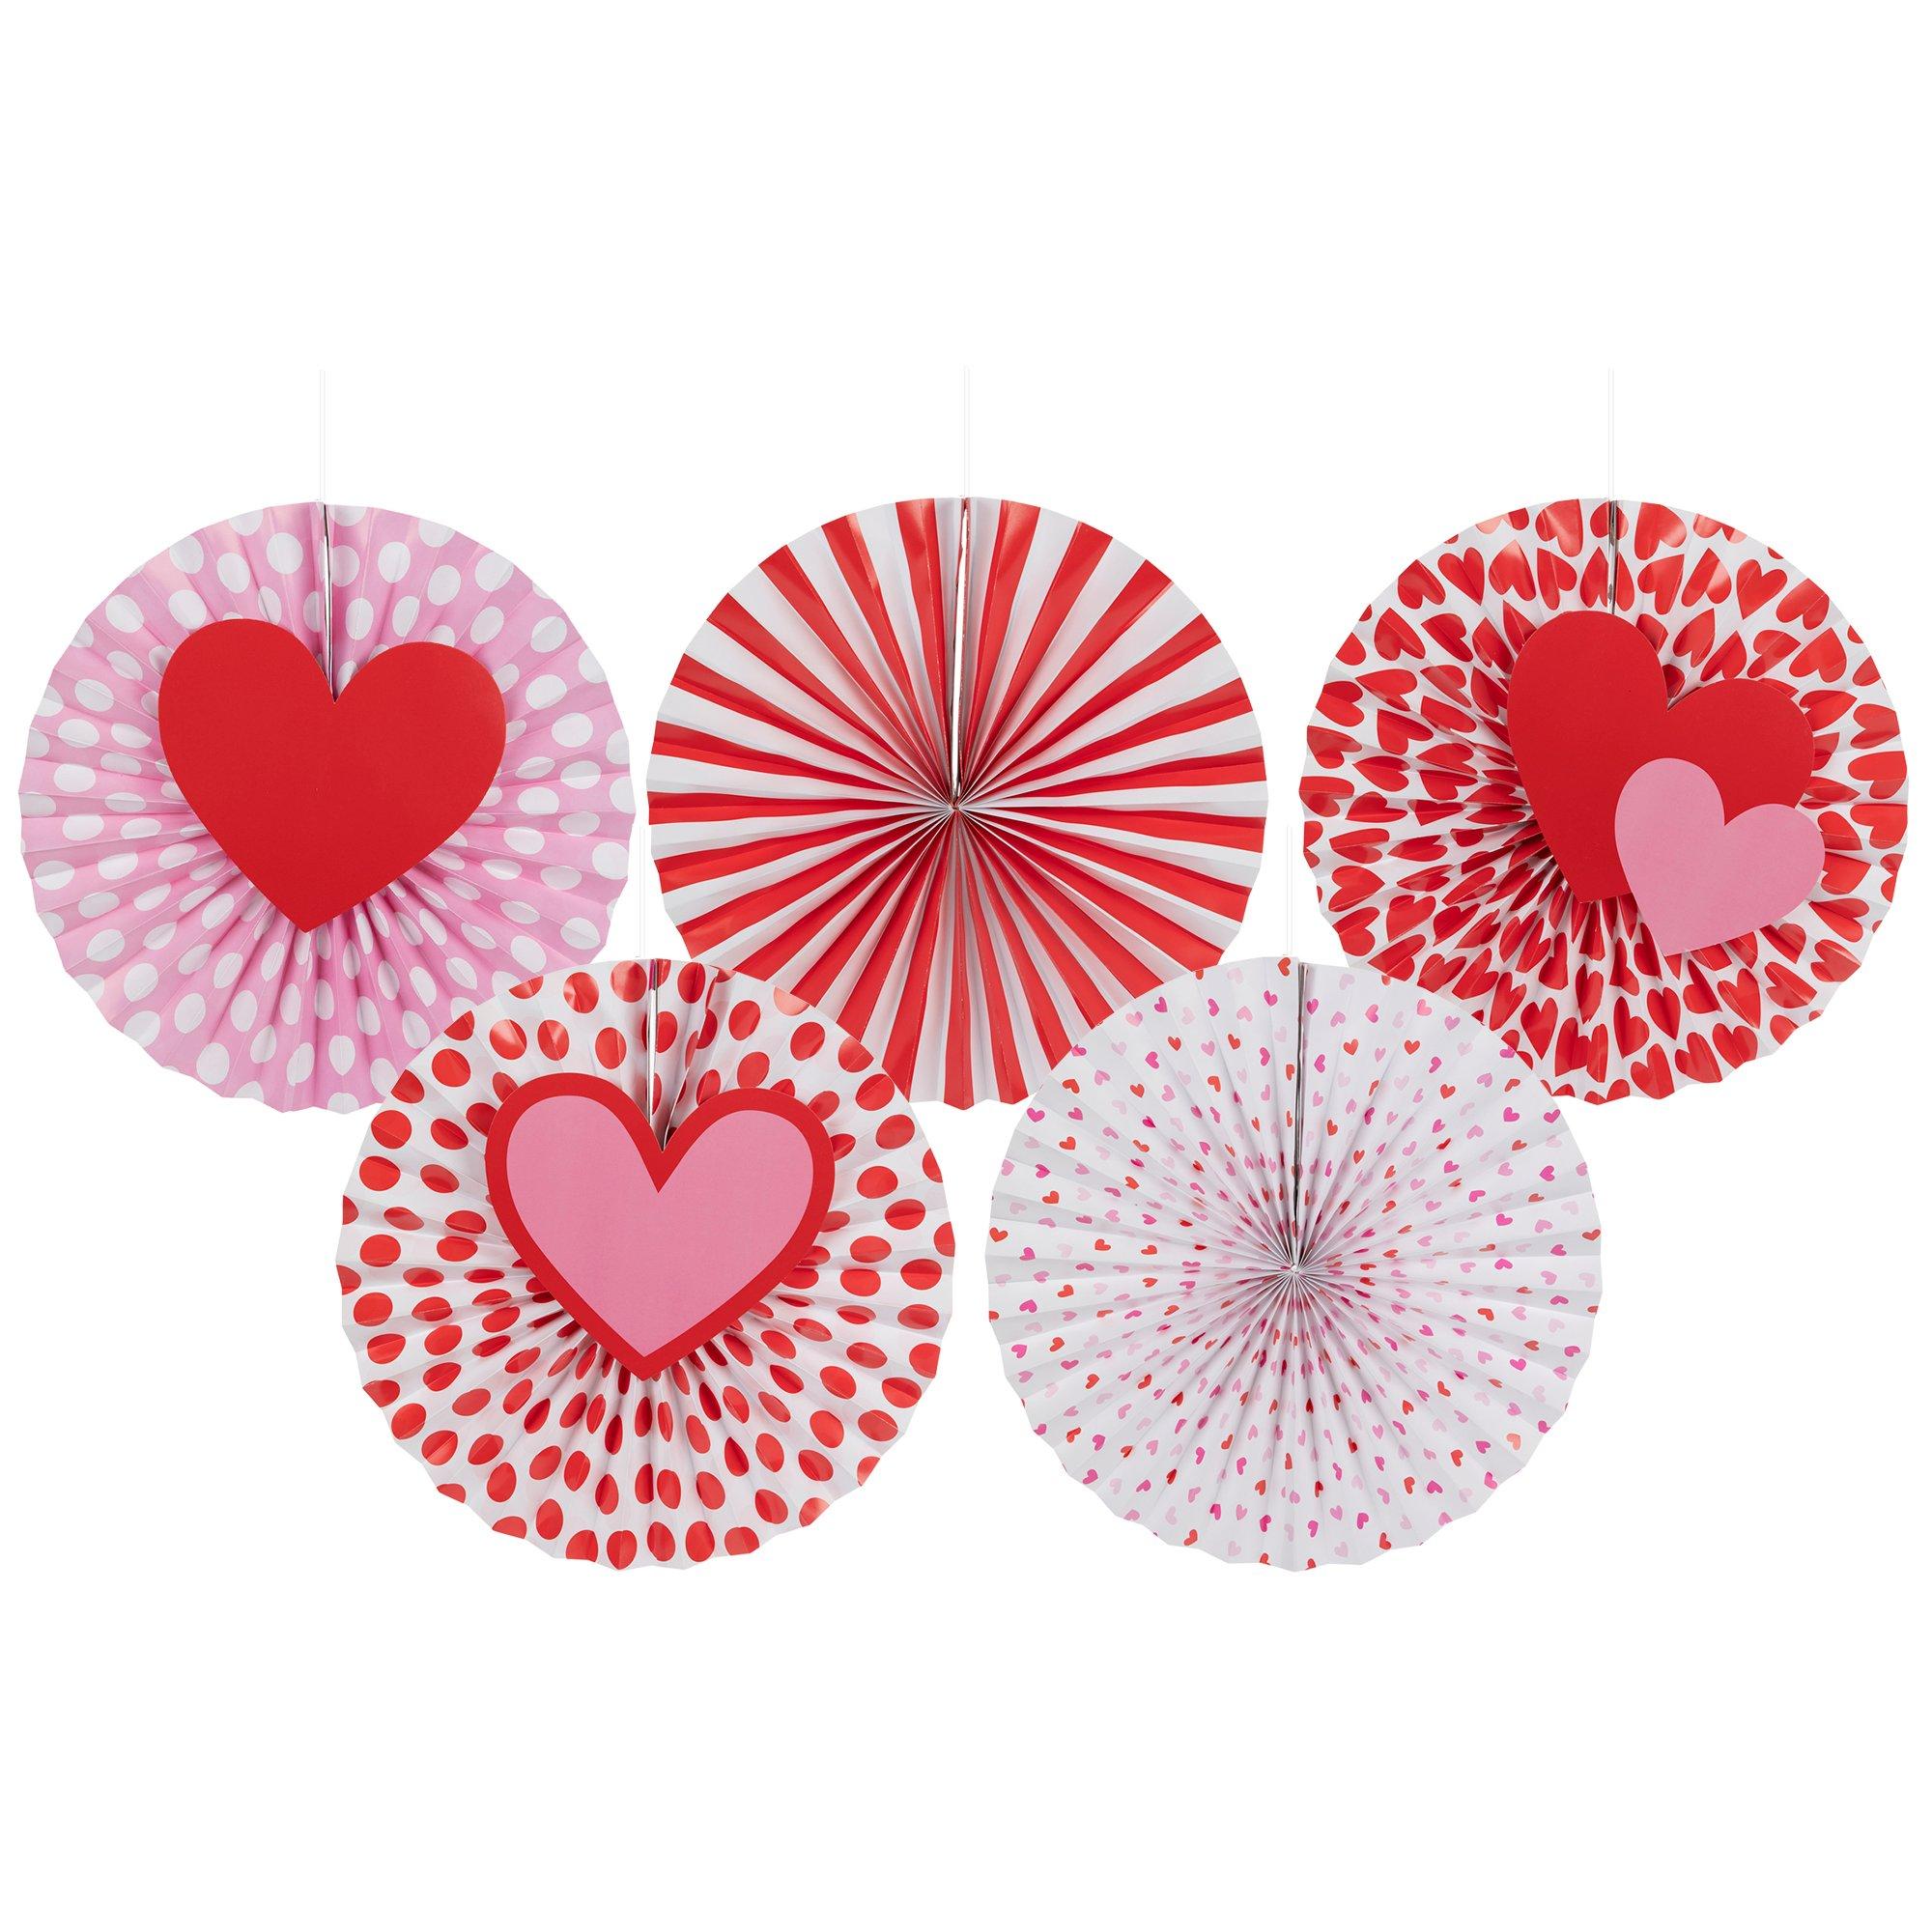 Hobby Lobby Colorful Paper Fan Party Decor, 14 Inches, 6 Fans